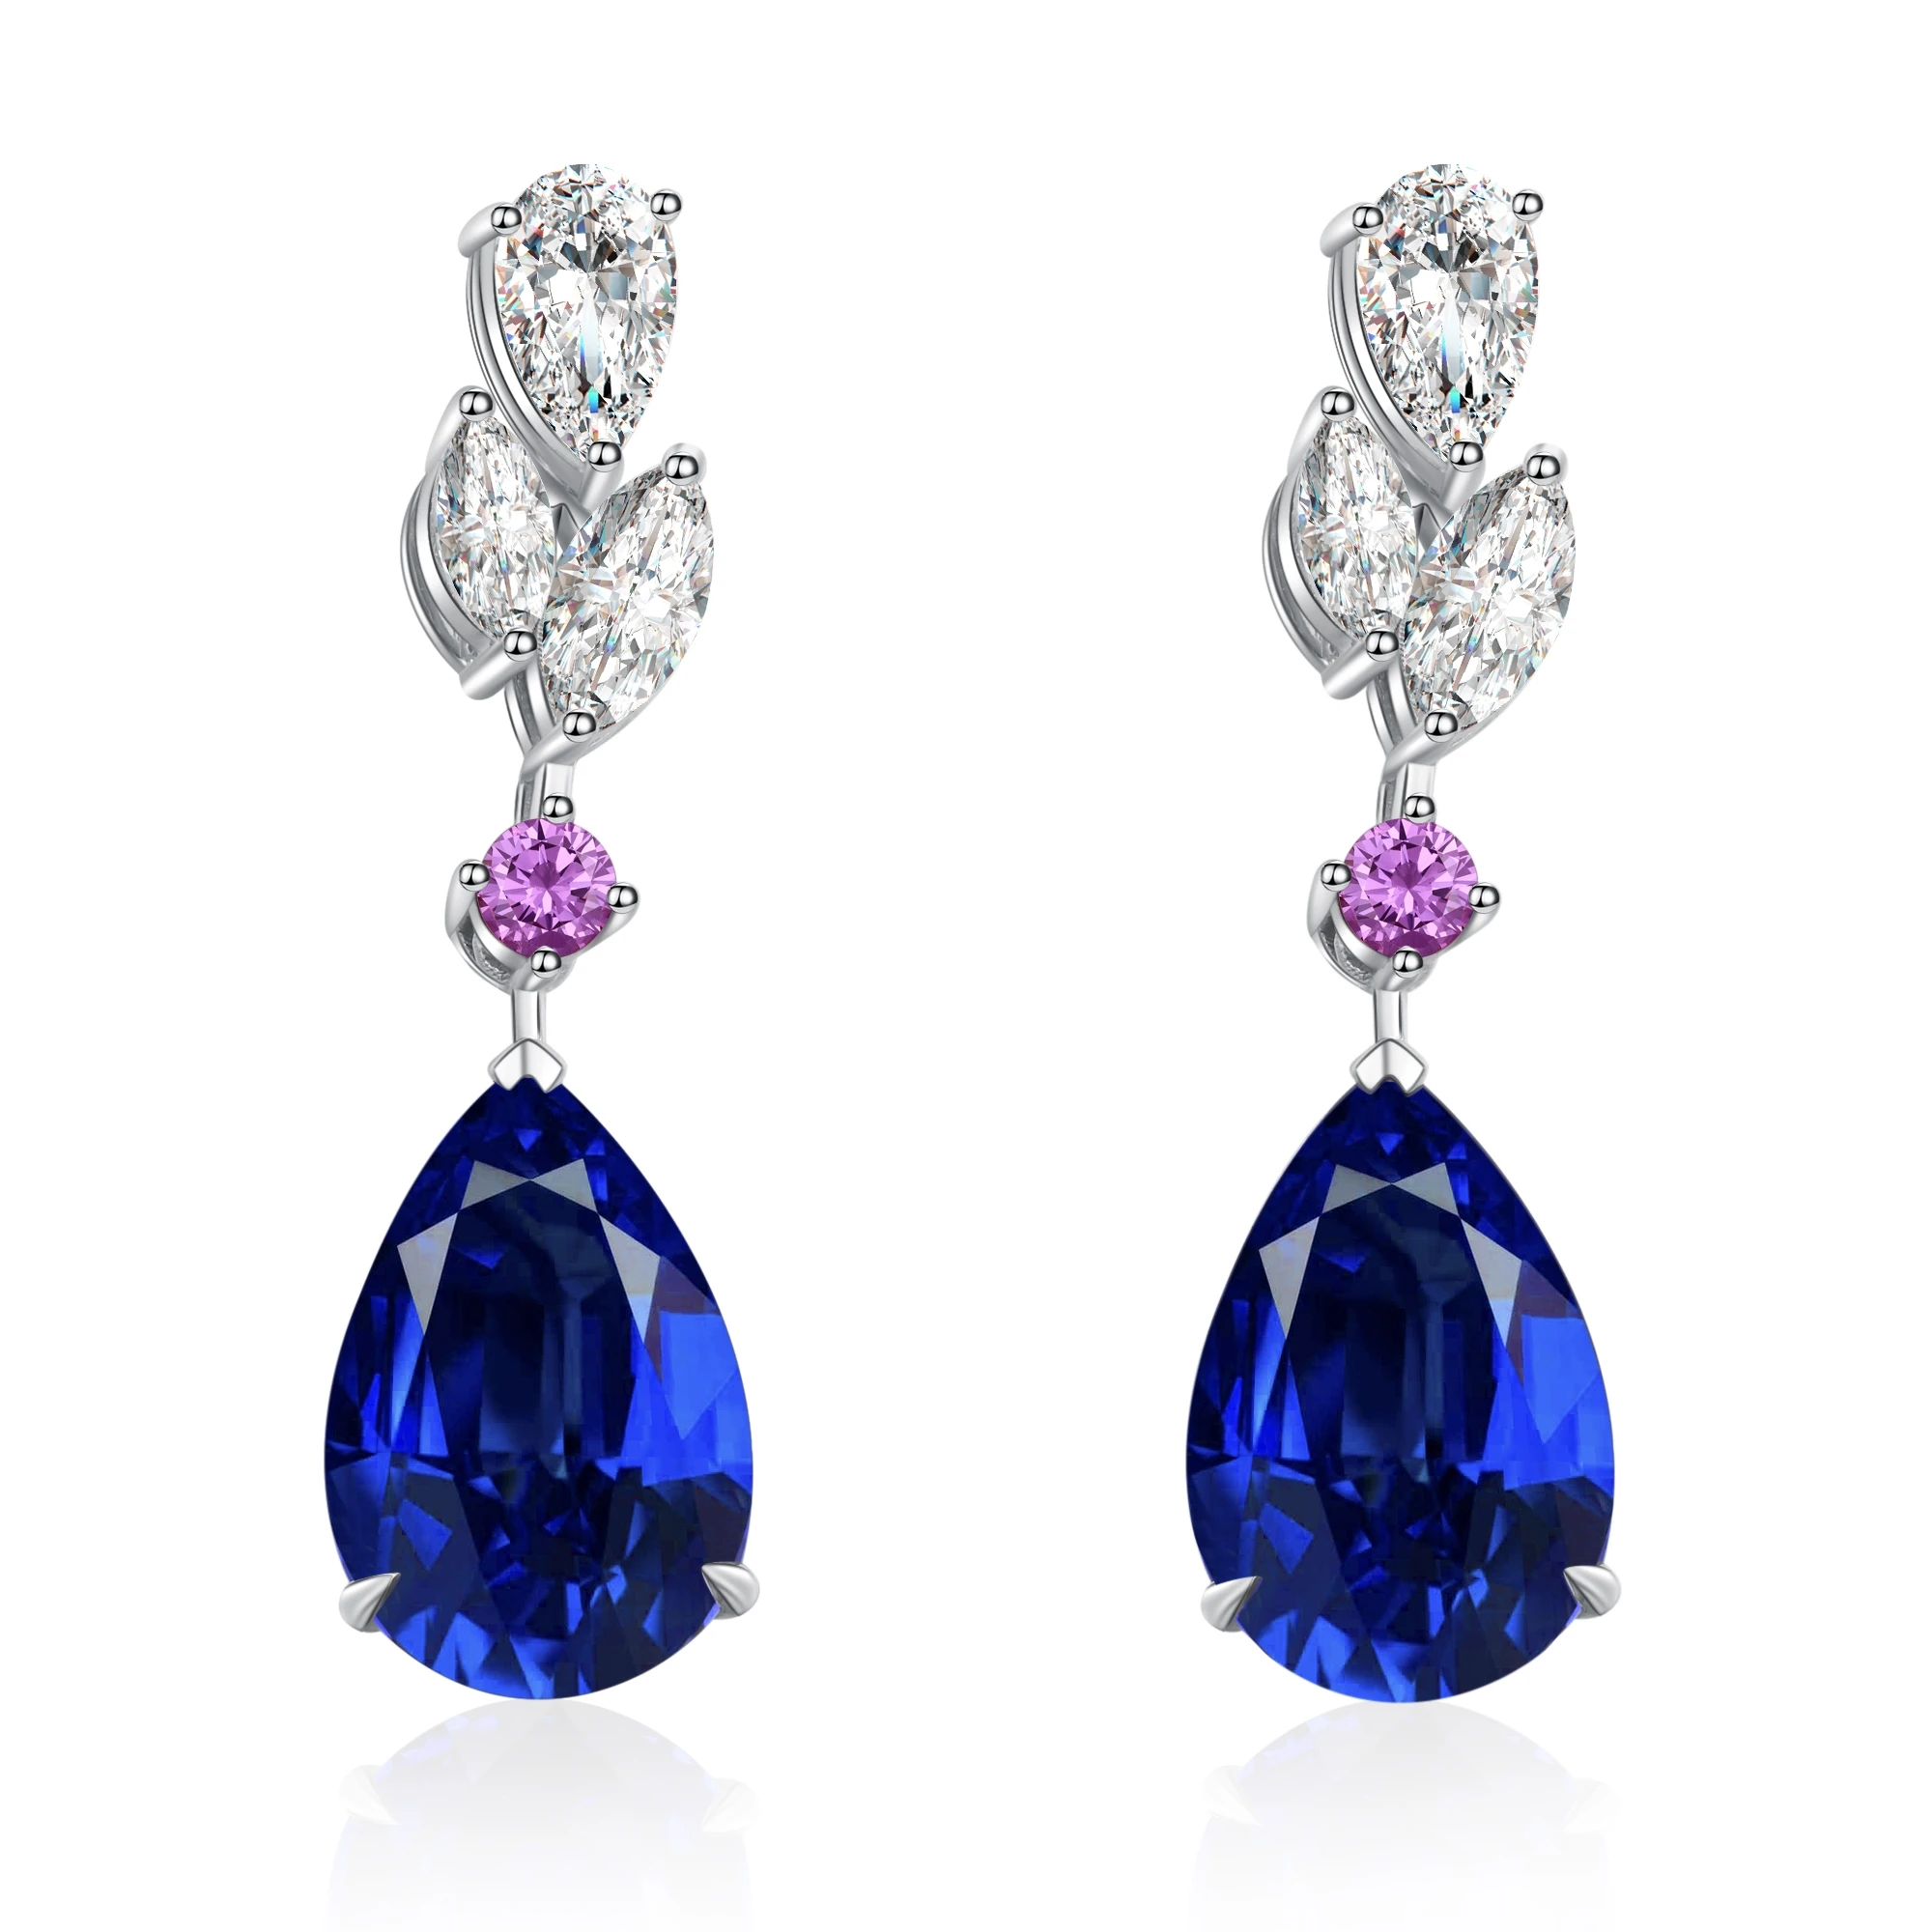 

Zhanhao Charming Sparkle Jewelry 5.42ct 10.5*7mm 9k Gold Lab Grown Sapphire High Quality Pendant Earrings For Women 2021